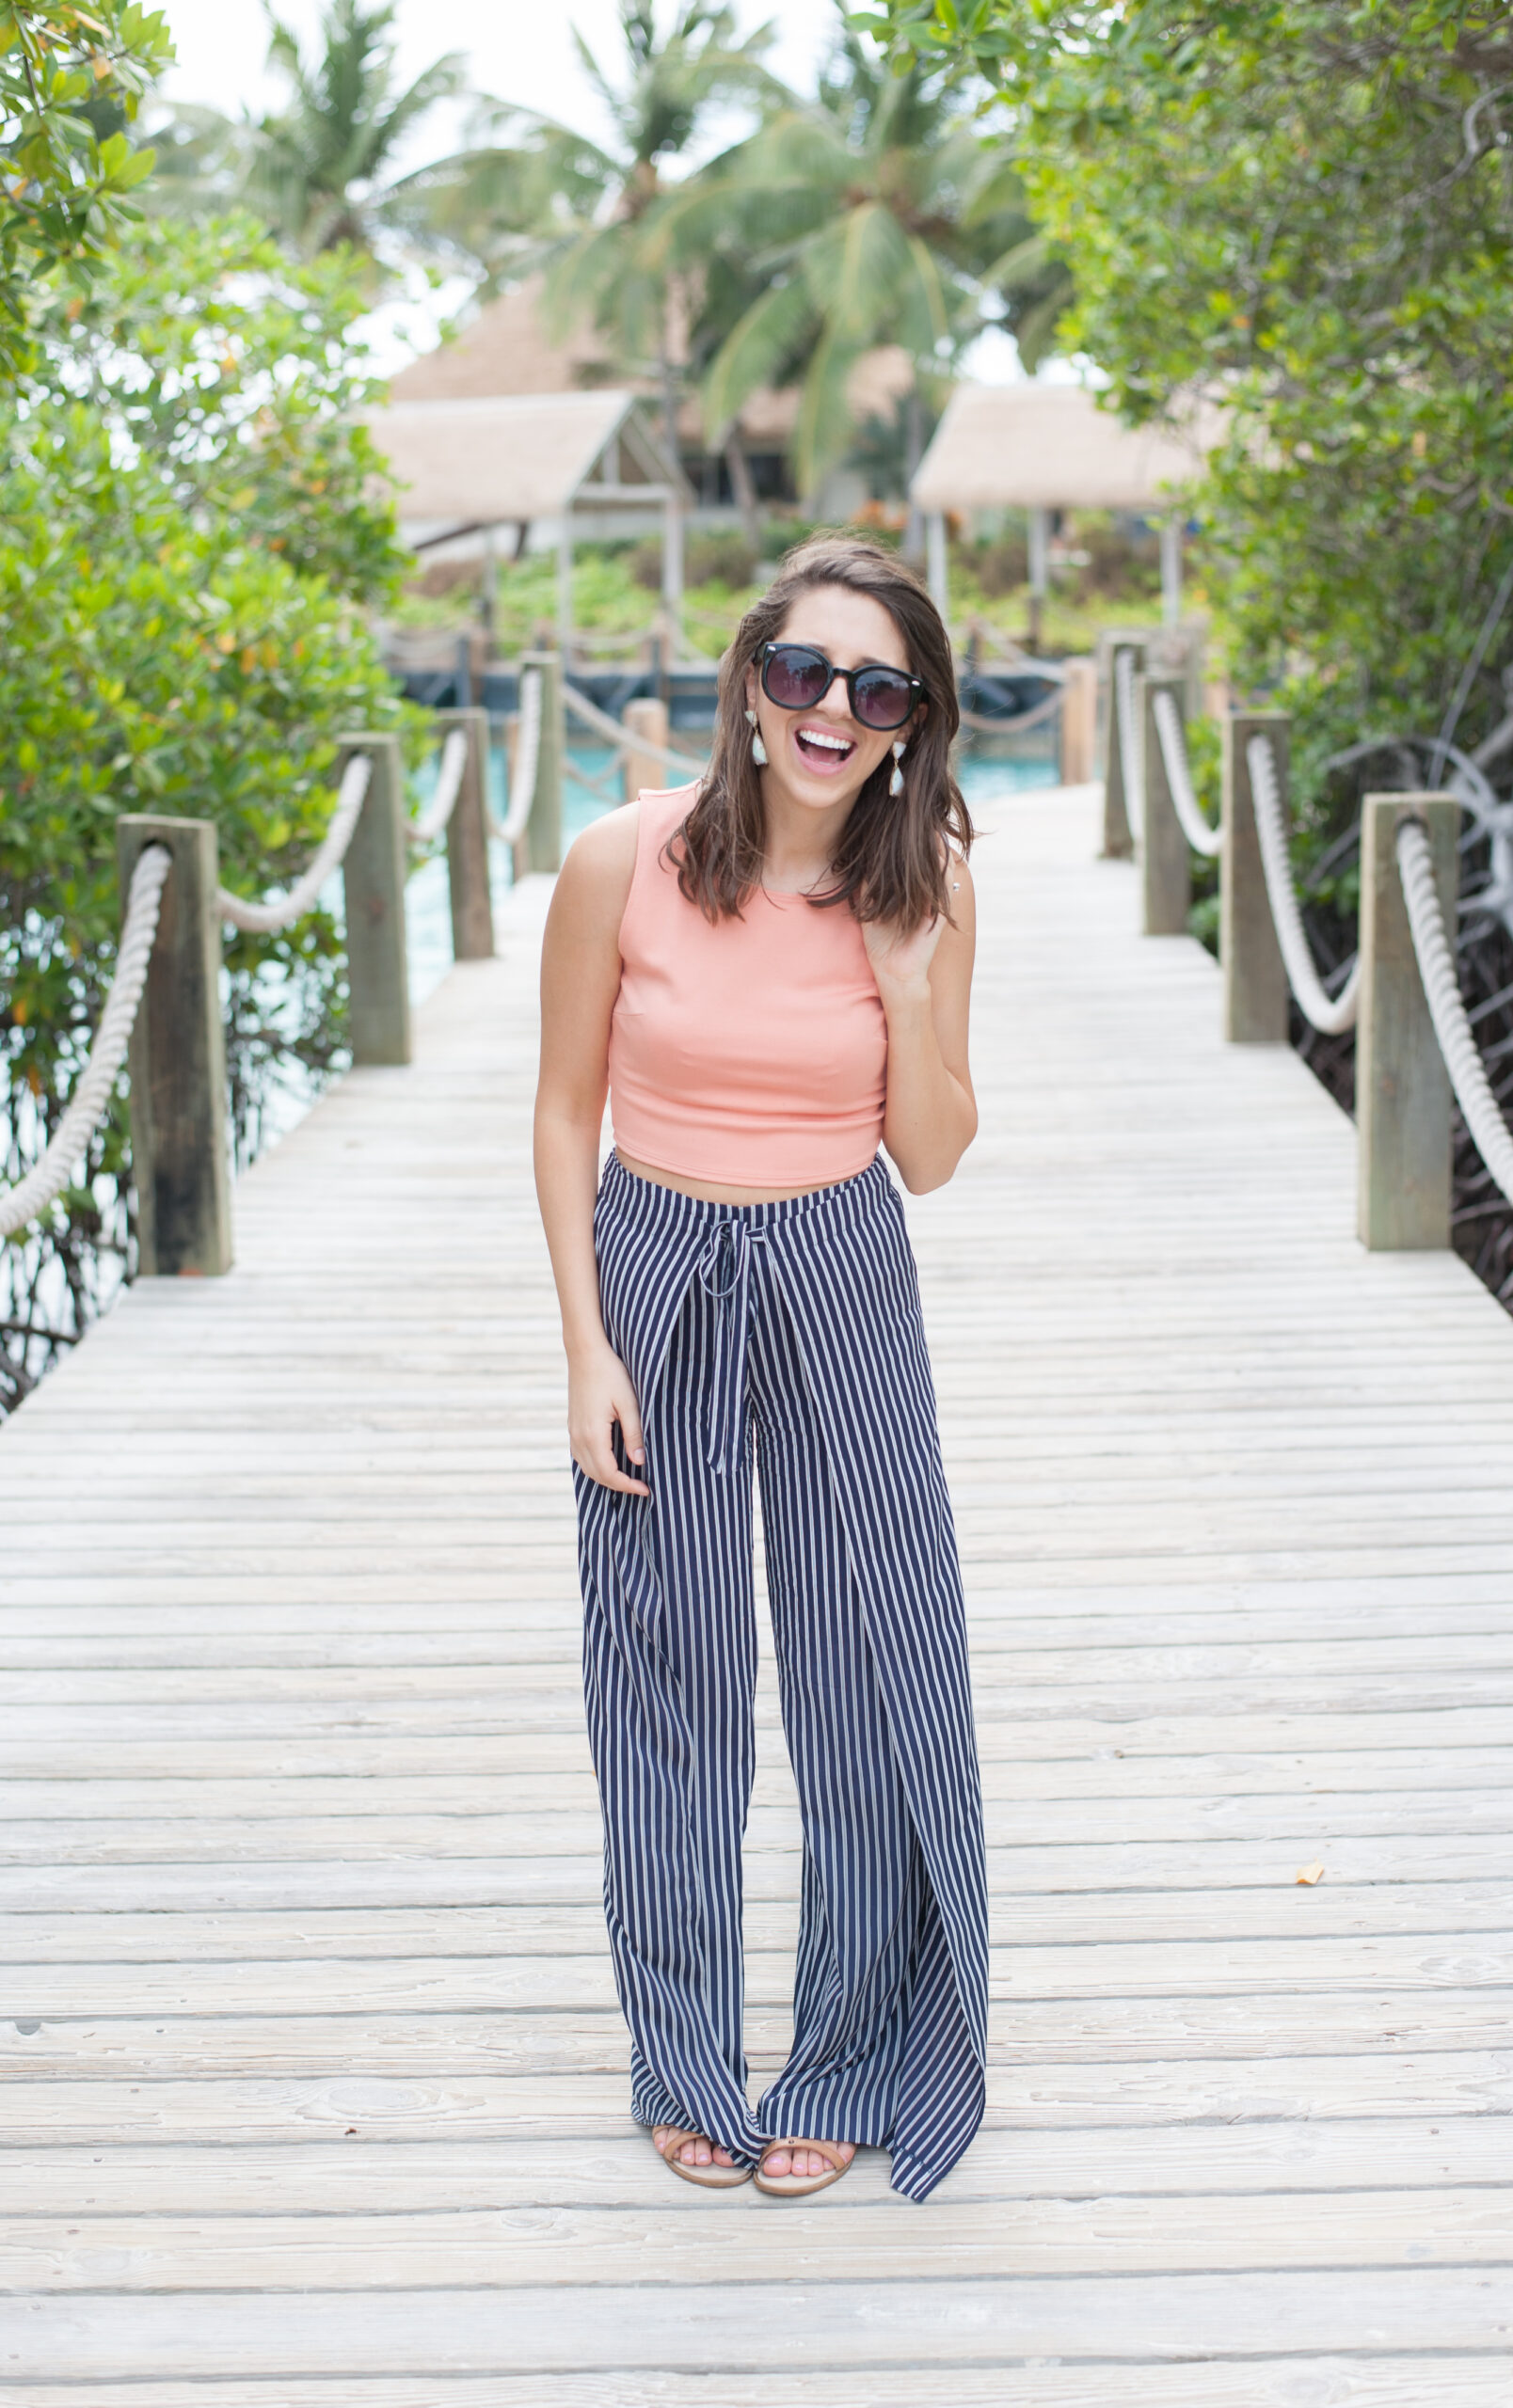 Dress Up Buttercup // A Houston-based fashion and inspiration blog developed to daily inspire your own personal style by Dede Raad | Aruba Renaissance Island